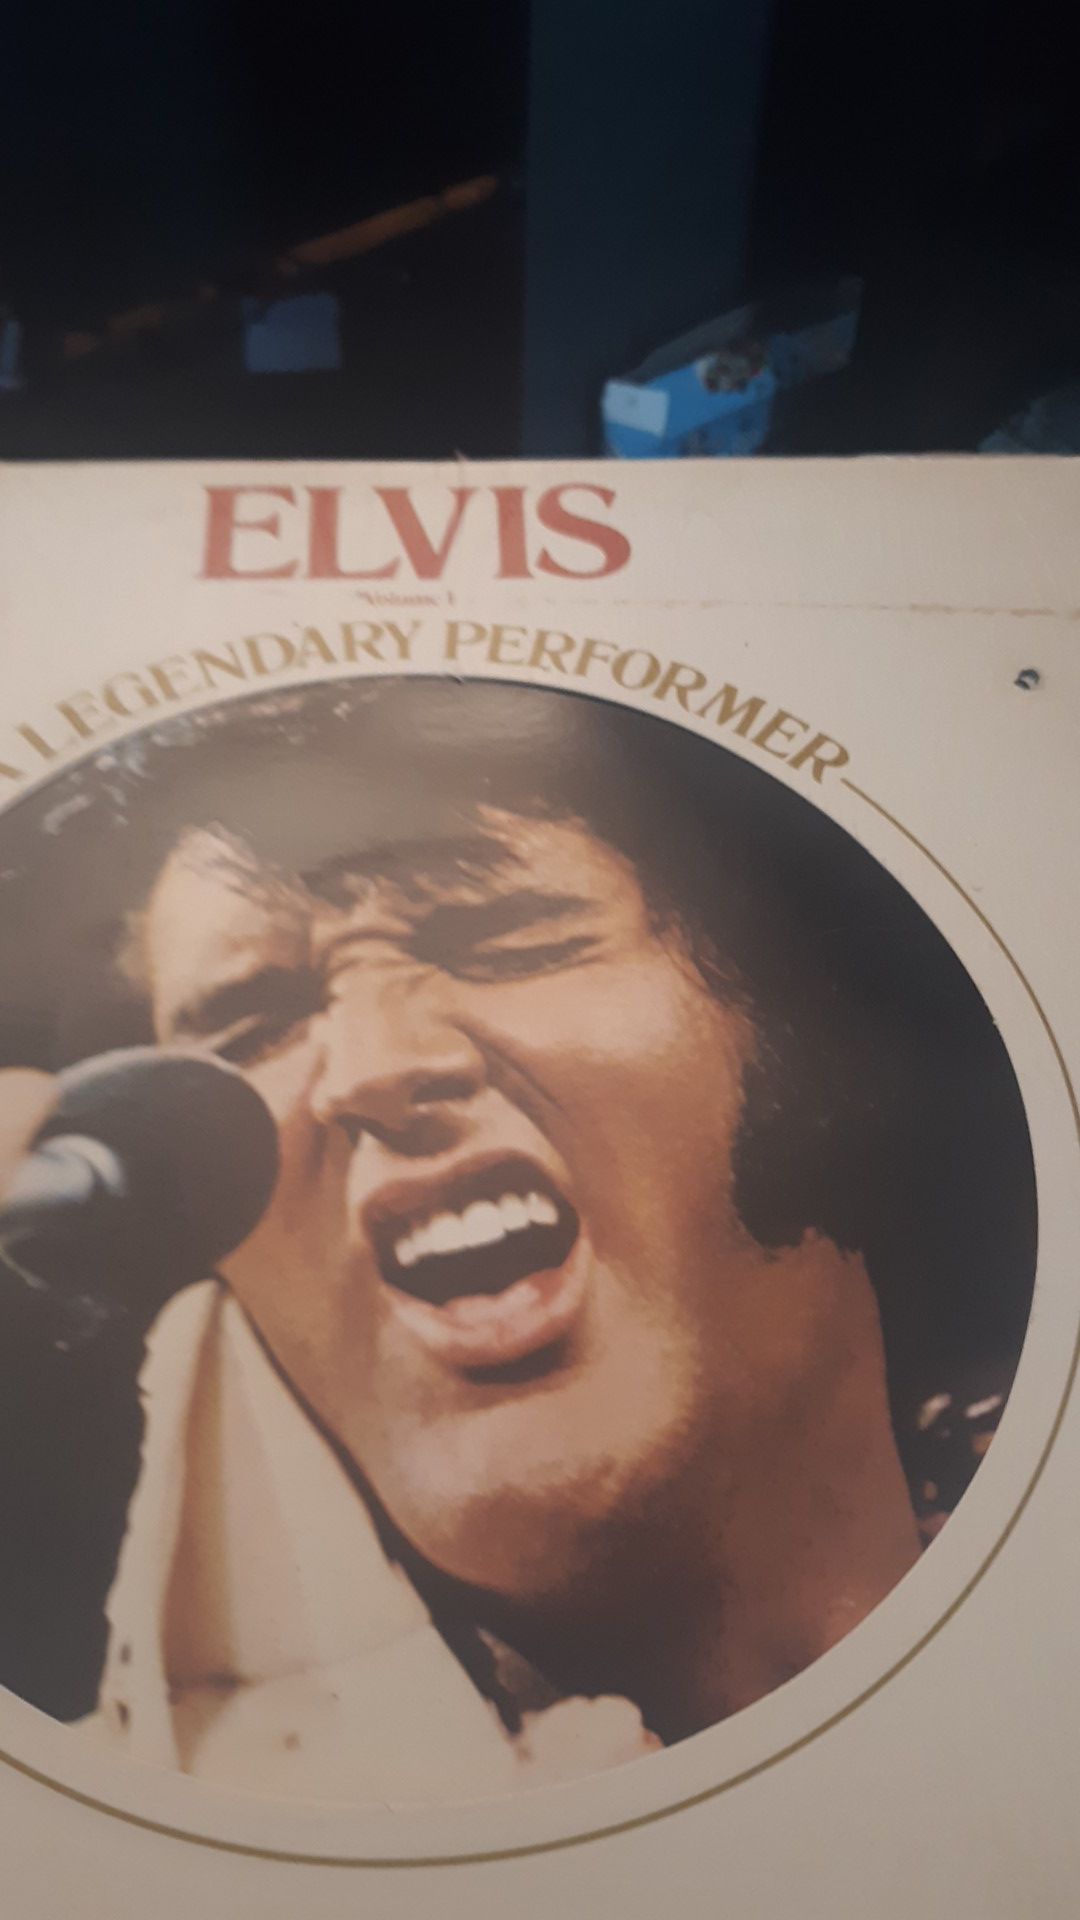 Elvis record albums old but rarely played